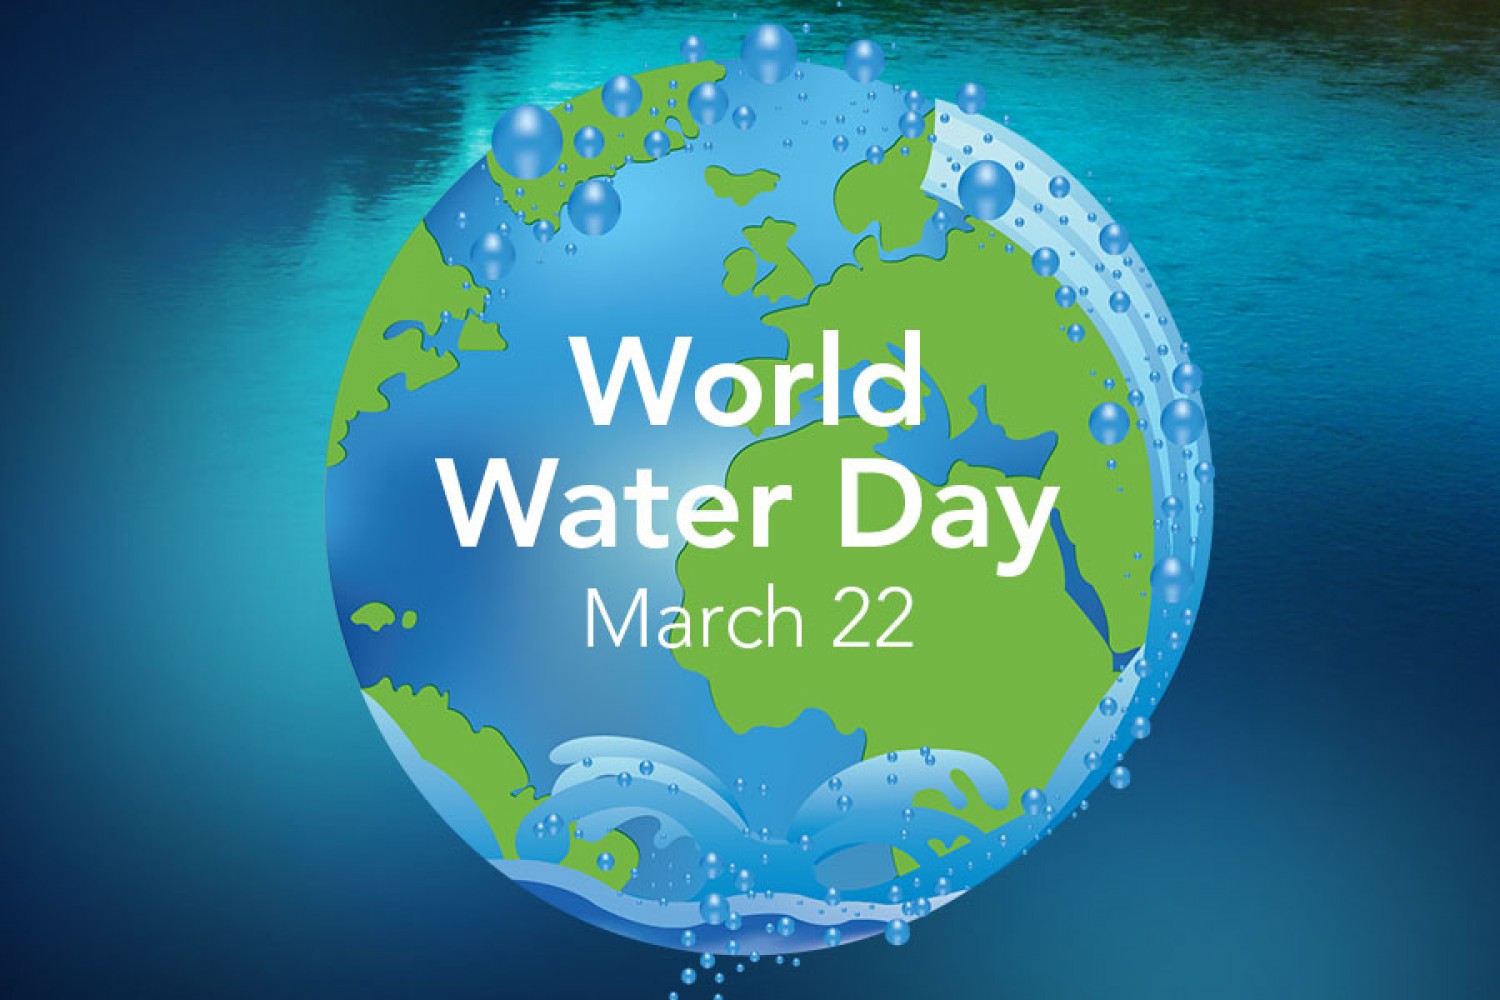 World Water Day today